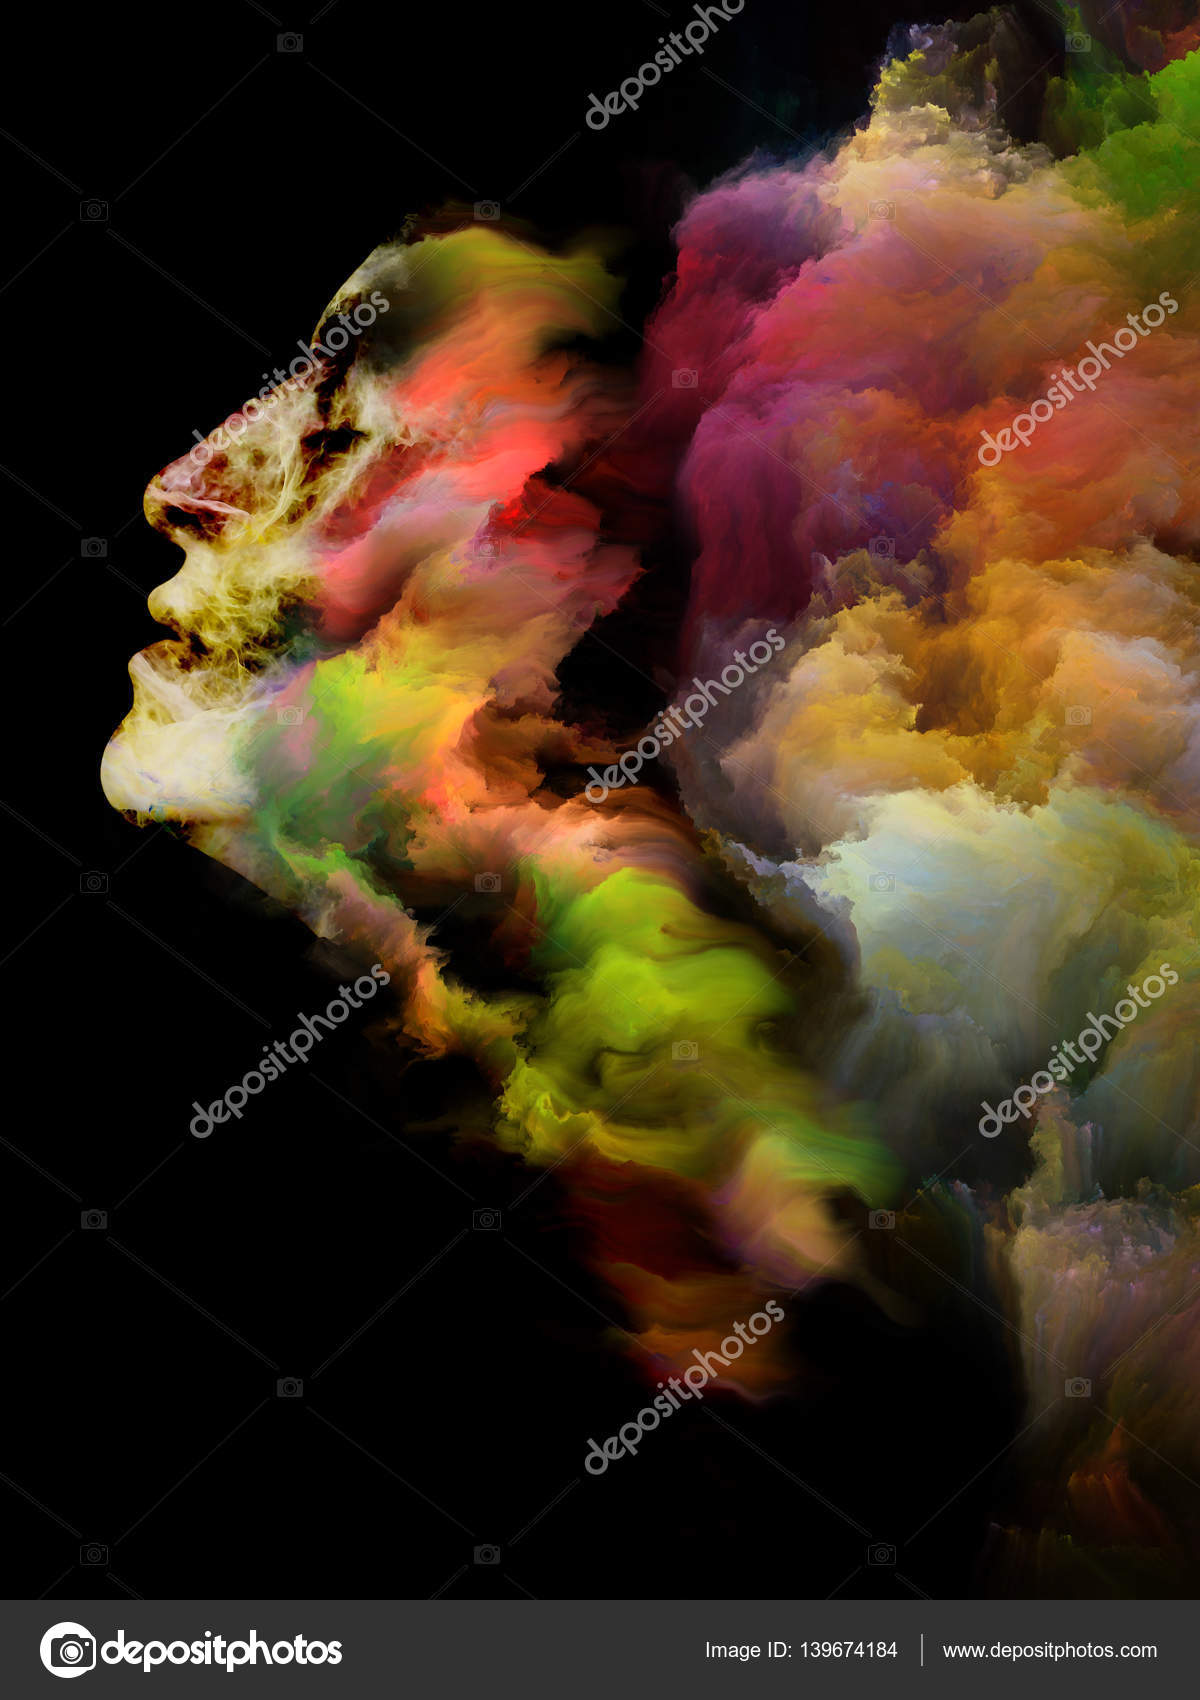 Separation of Dreams concept — Stock Photo © agsandrew #139674184